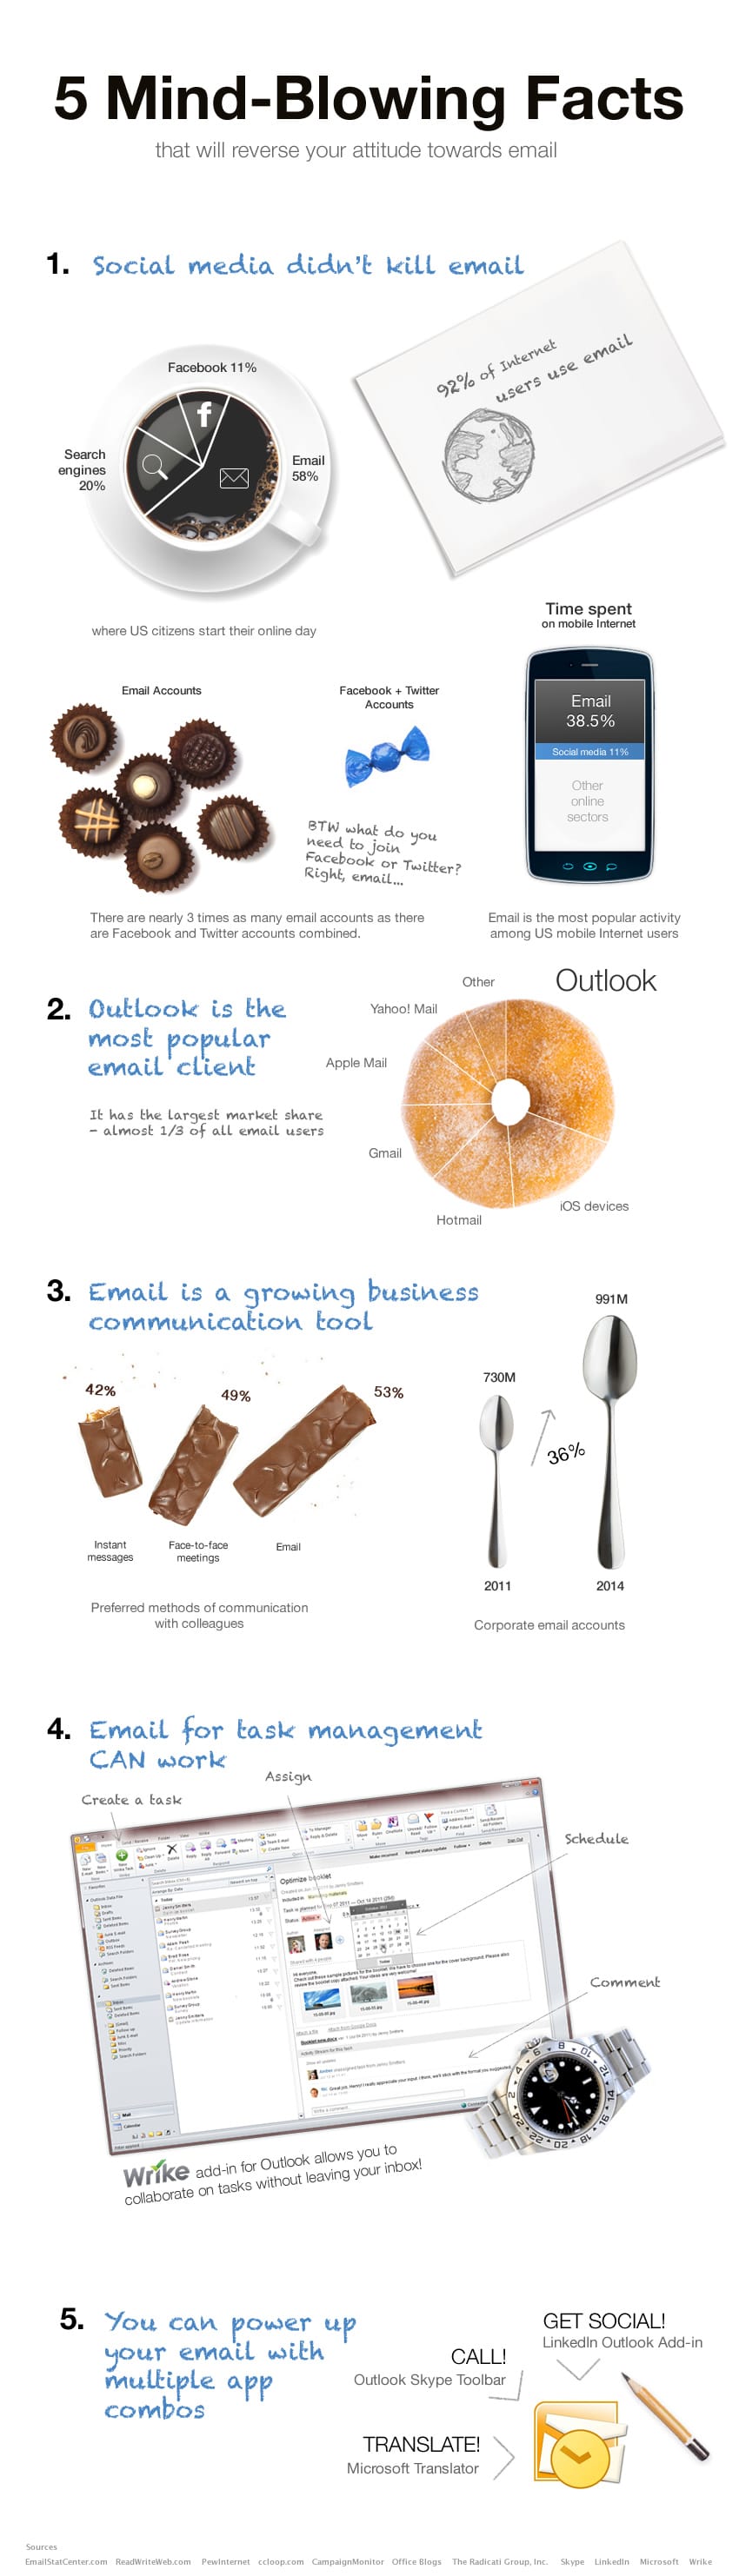 mind-blowing-email-facts-infographic